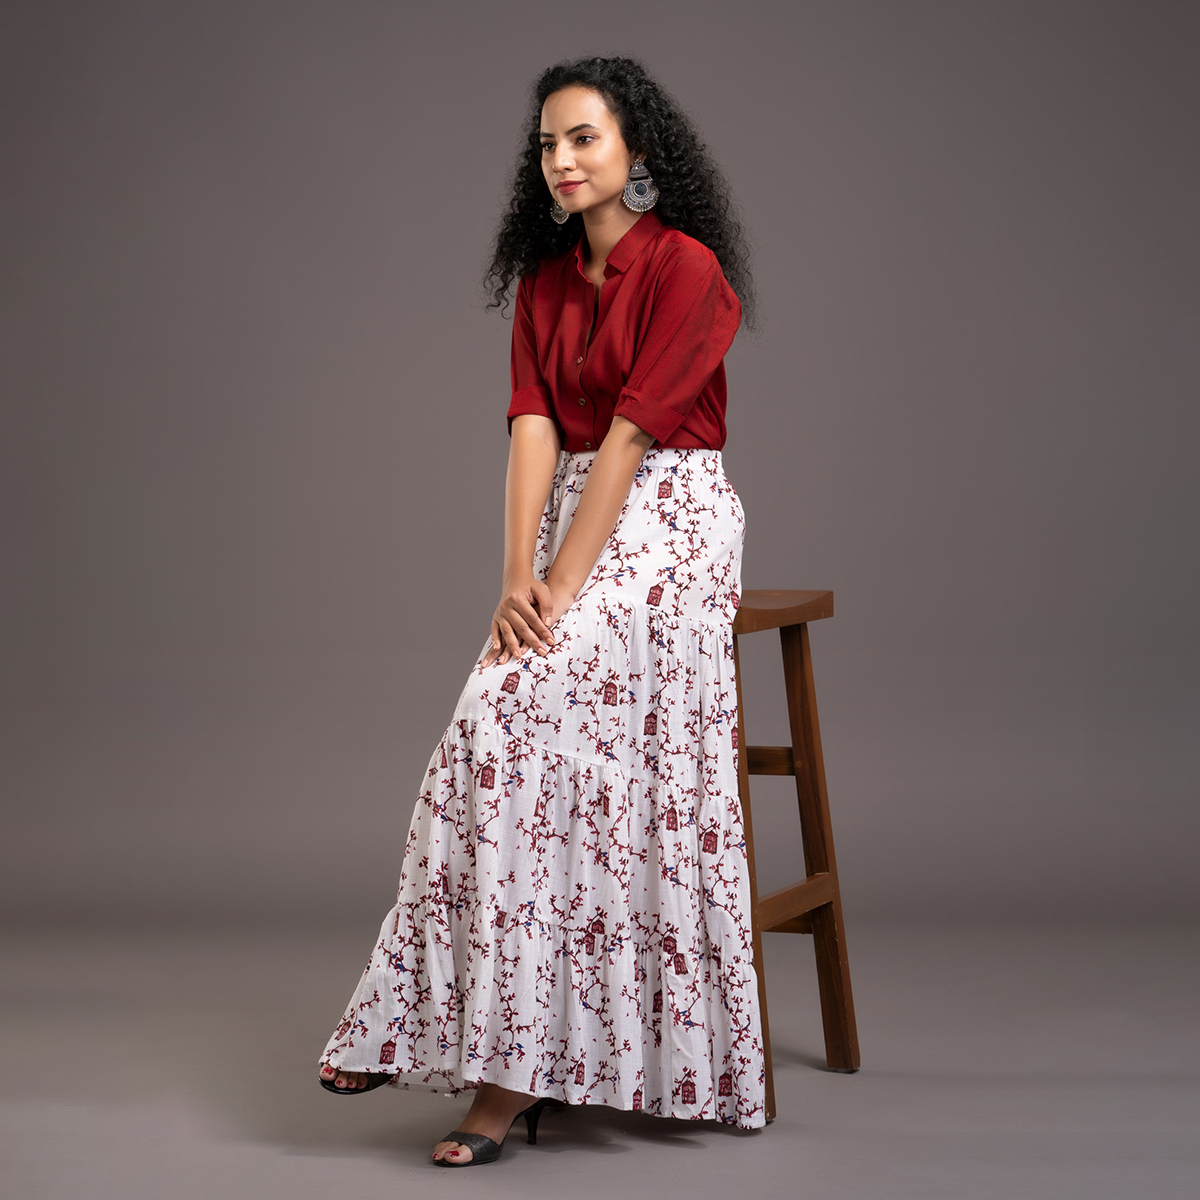 Zella Solid Color Cotton Silk Elbow Sleeve Shirt & Cotton Printed Tyre Skirt Set -  Maroon & white